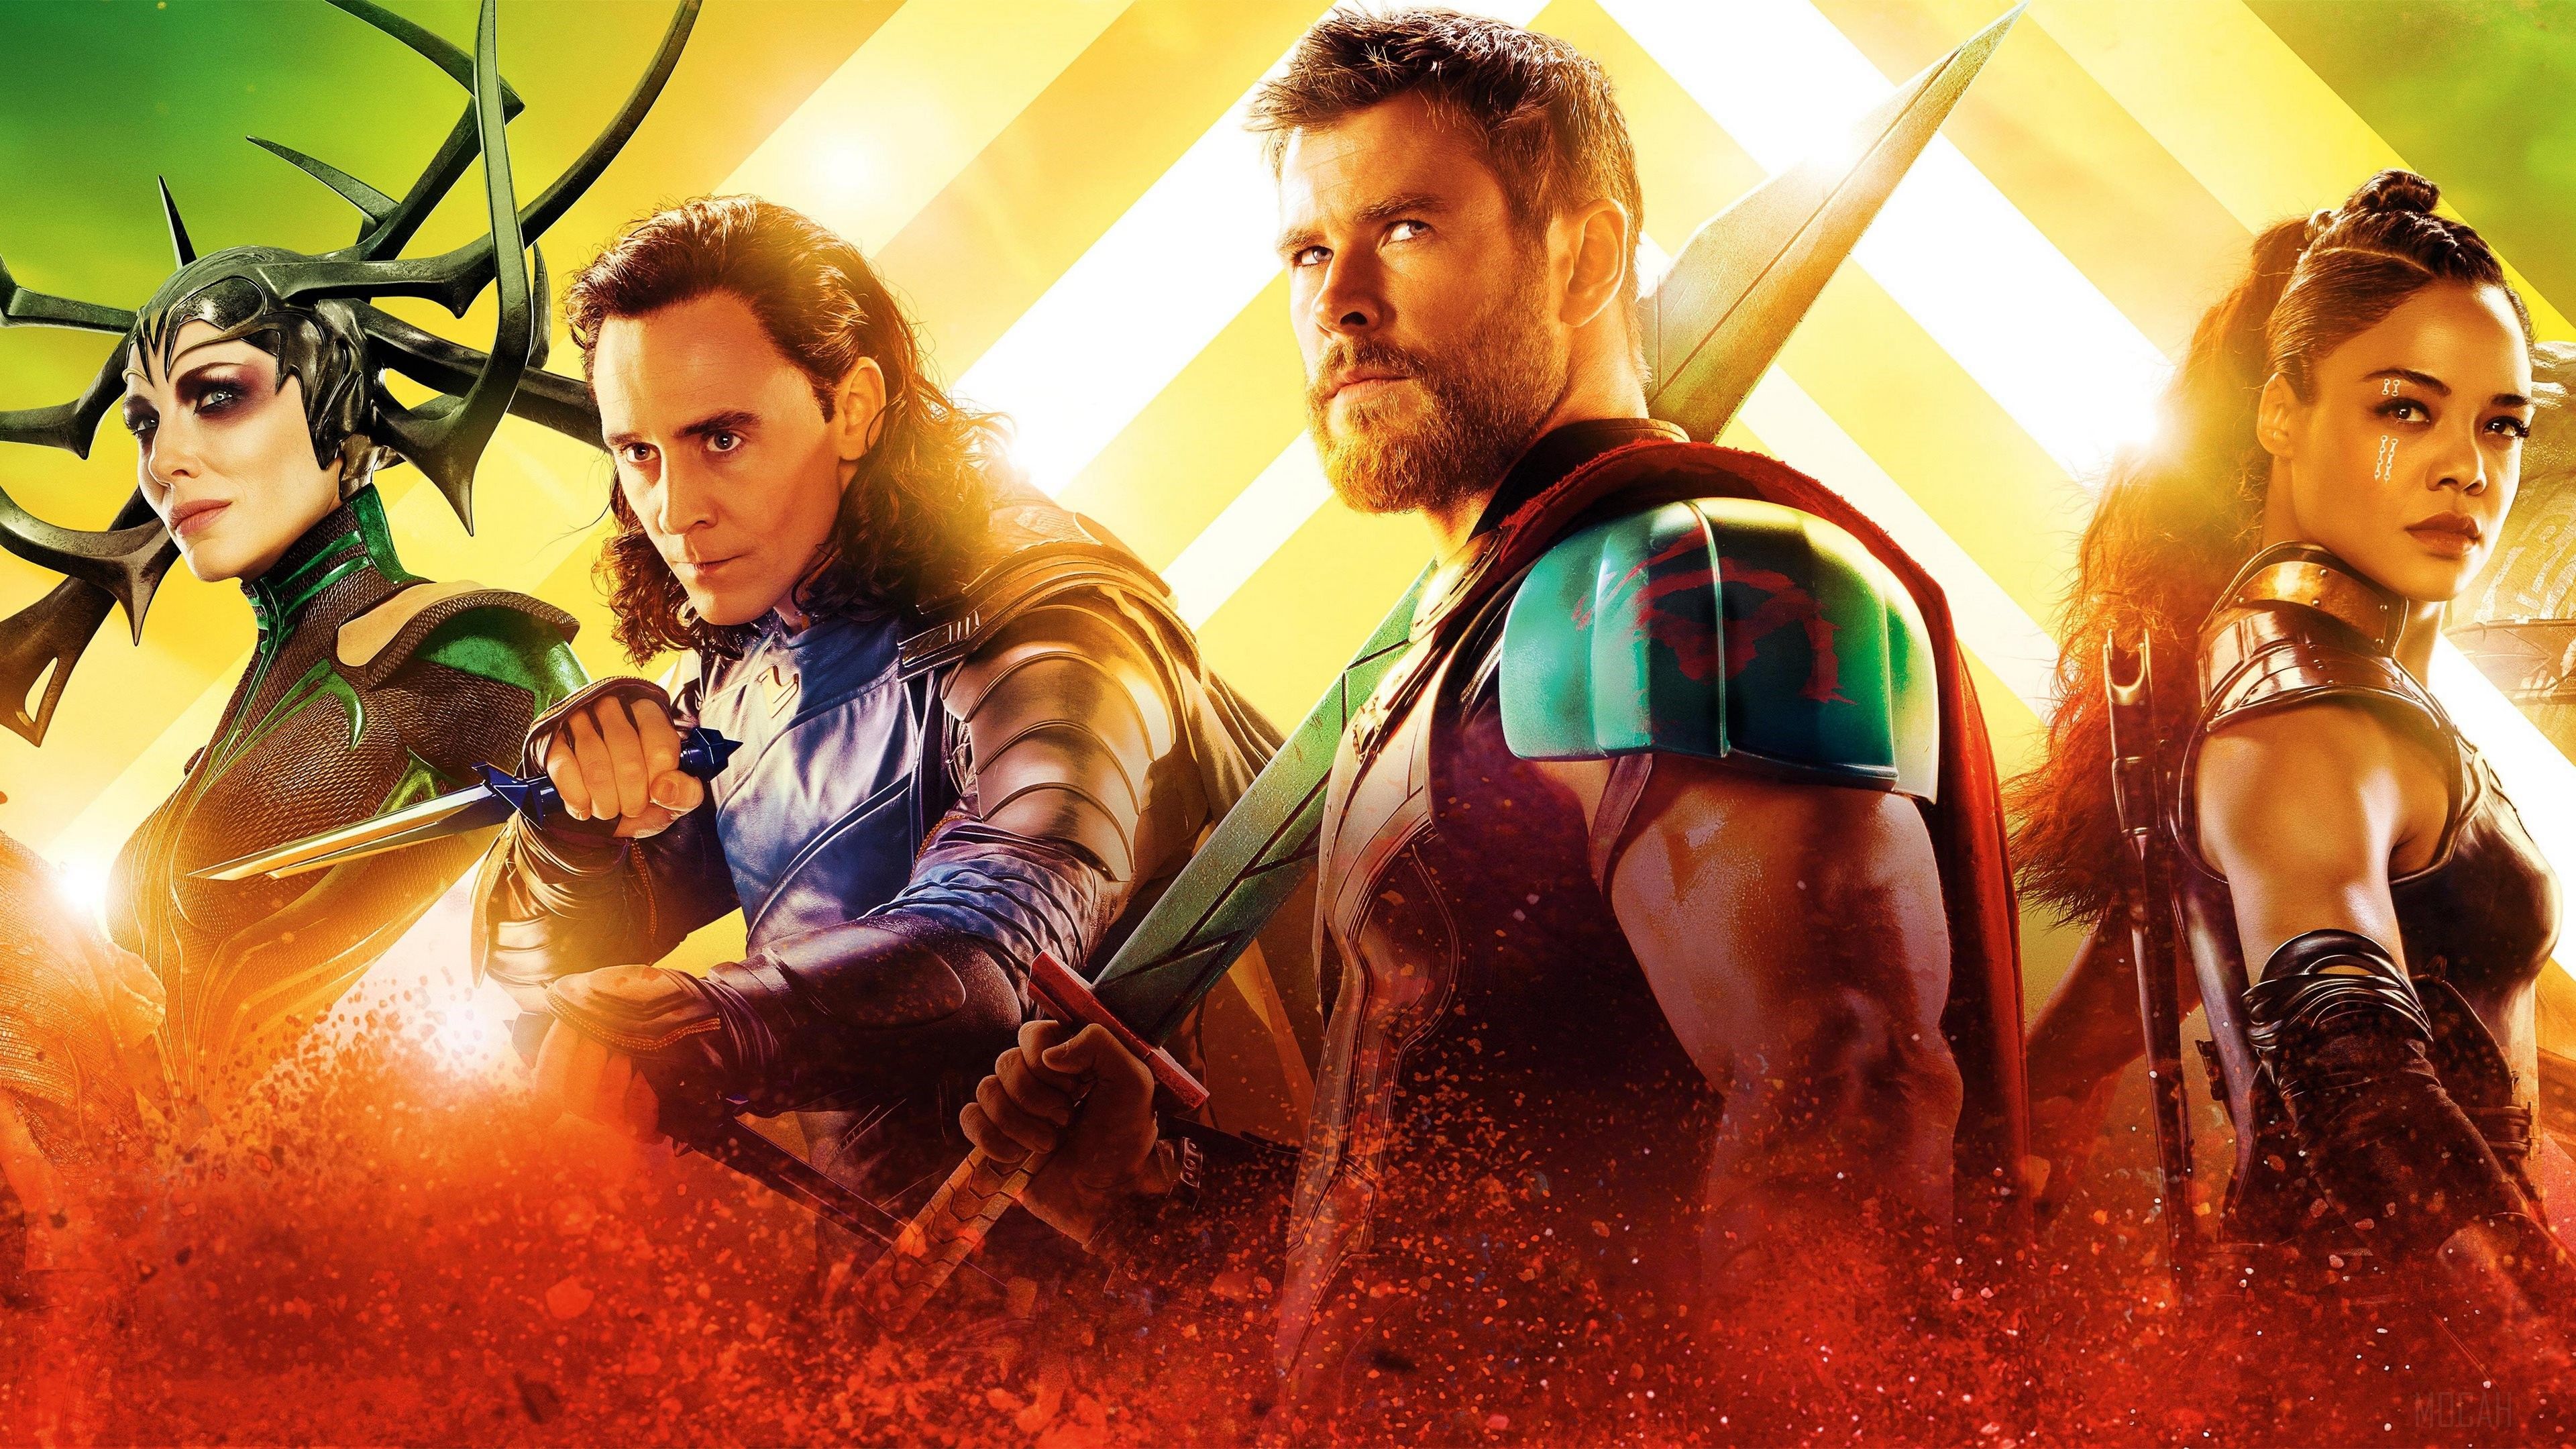 The first trailer for Thor: Ragnarok is here, and it's off the charts - Loki, Thor